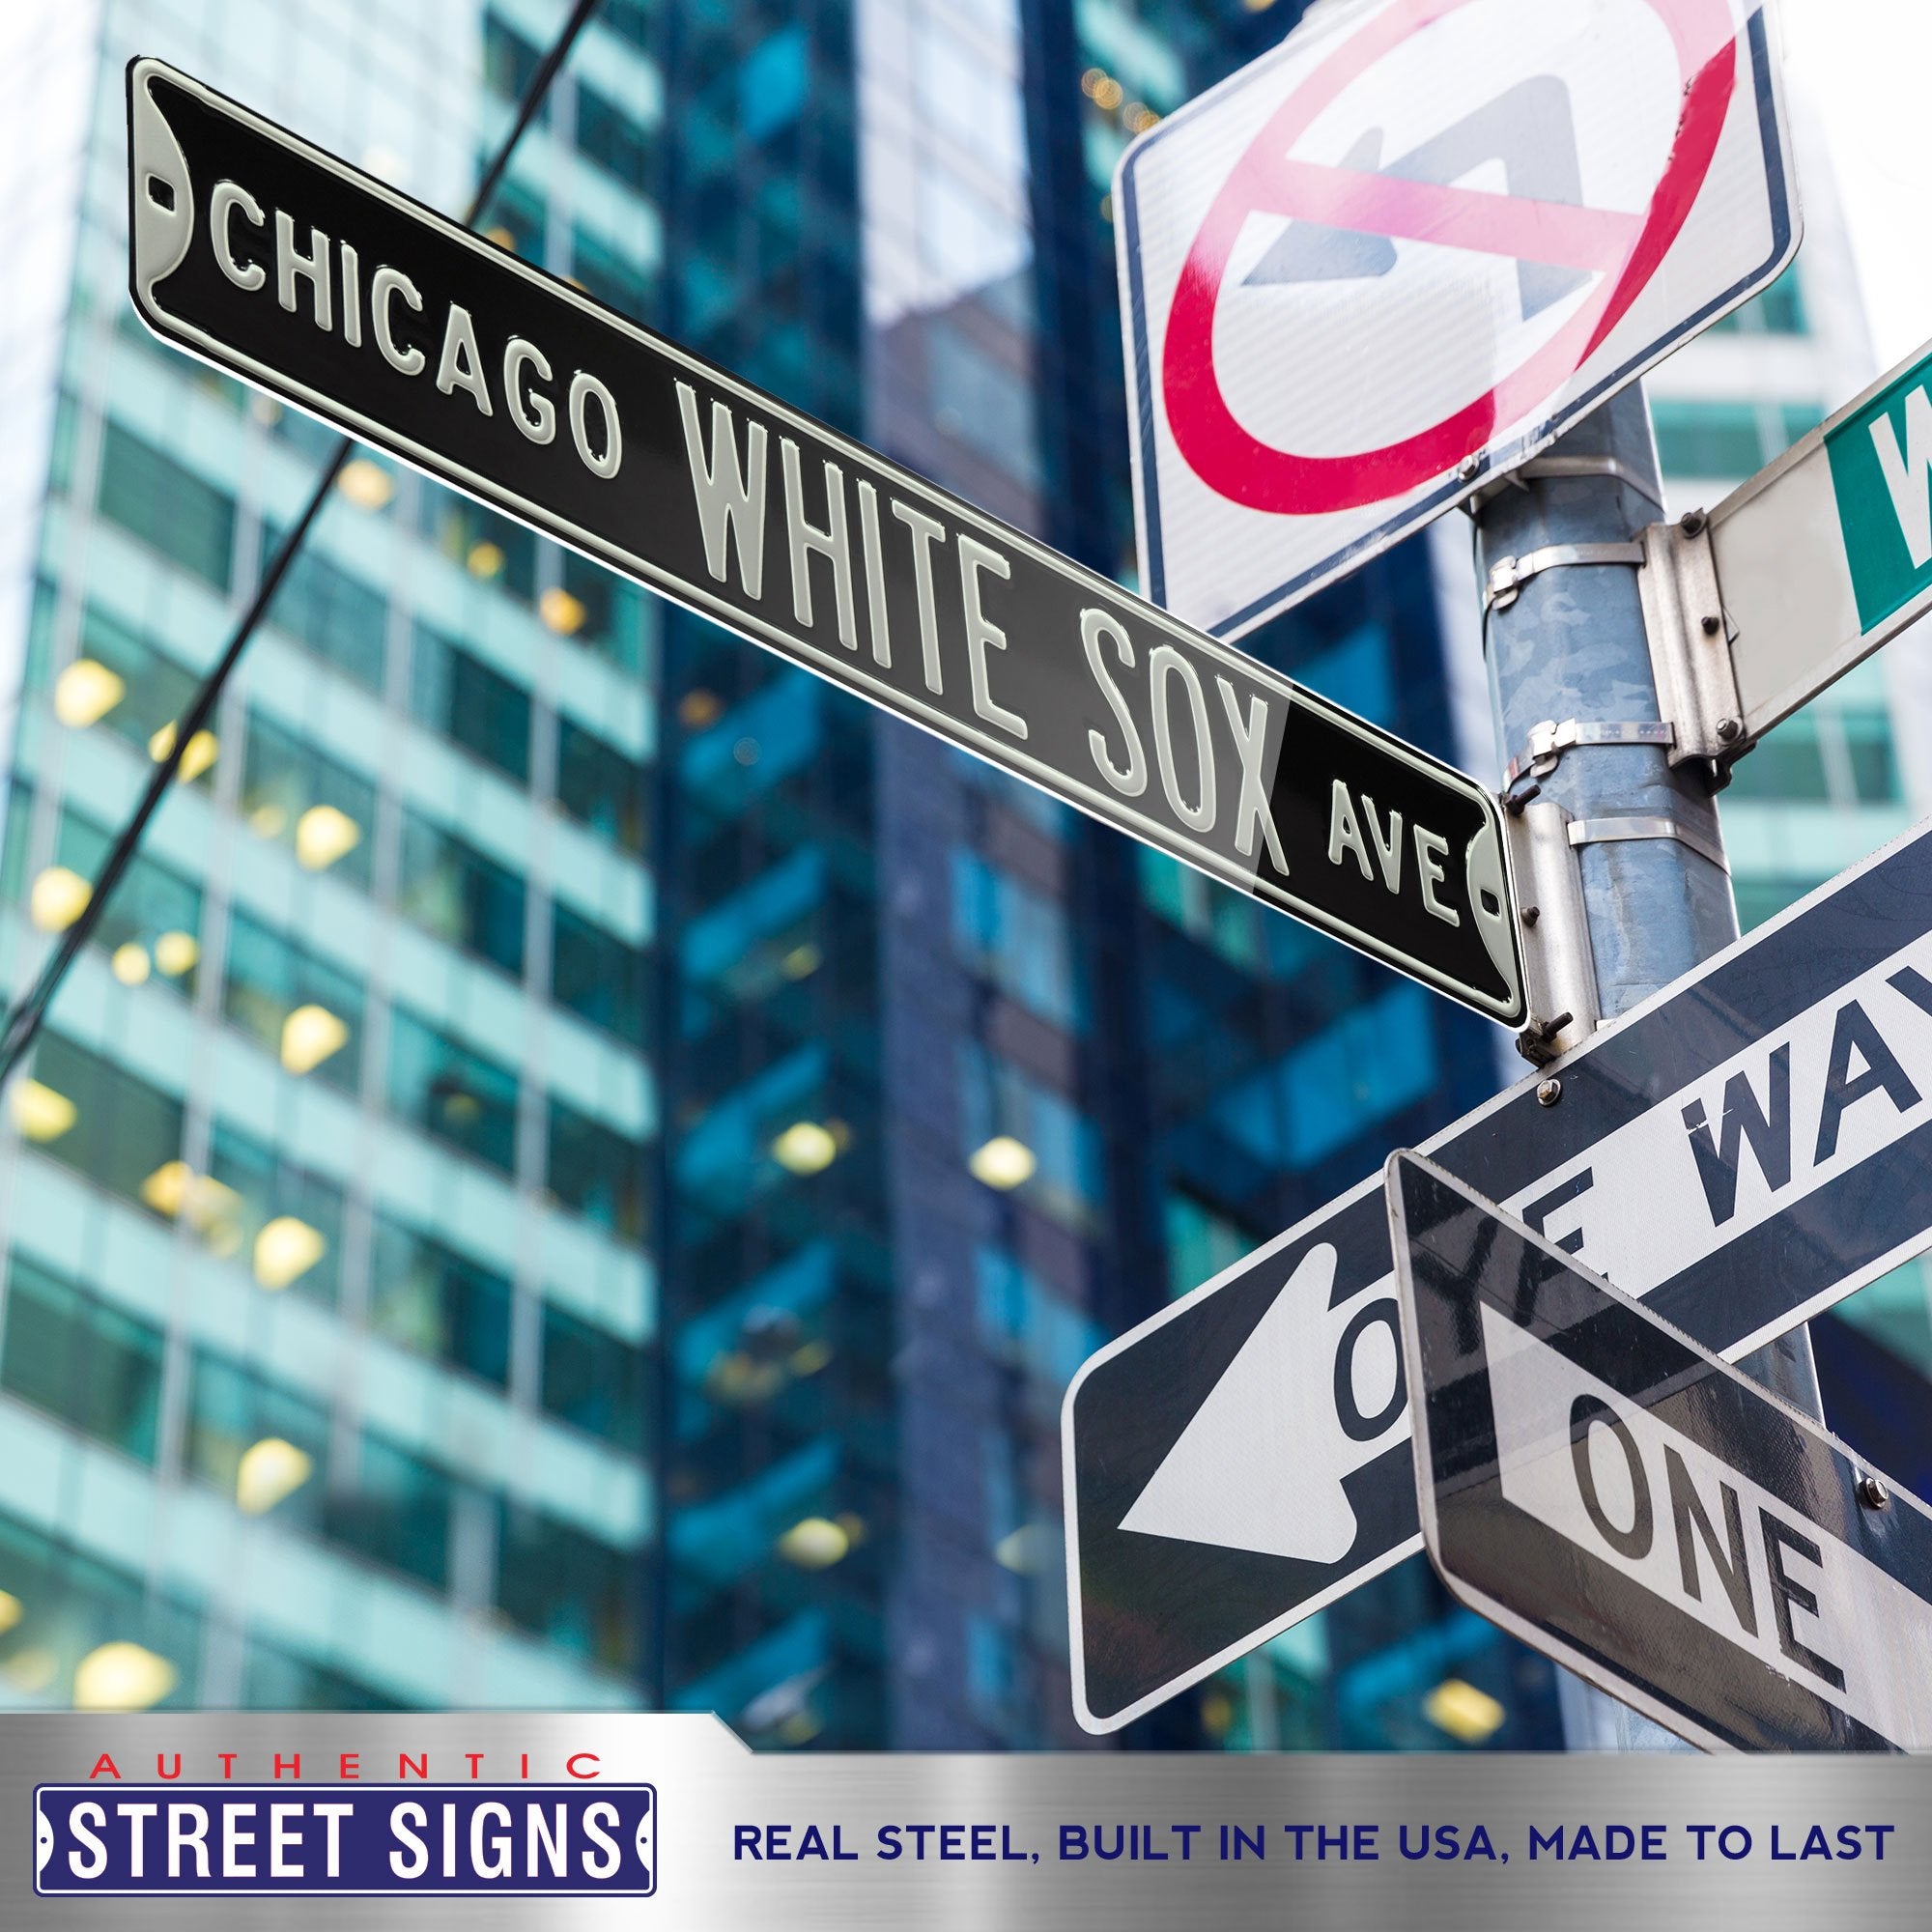 Chicago White Sox Steel Street Sign-CHICAGO WHITE SOX AVE 36" W x 6" H by Fathead